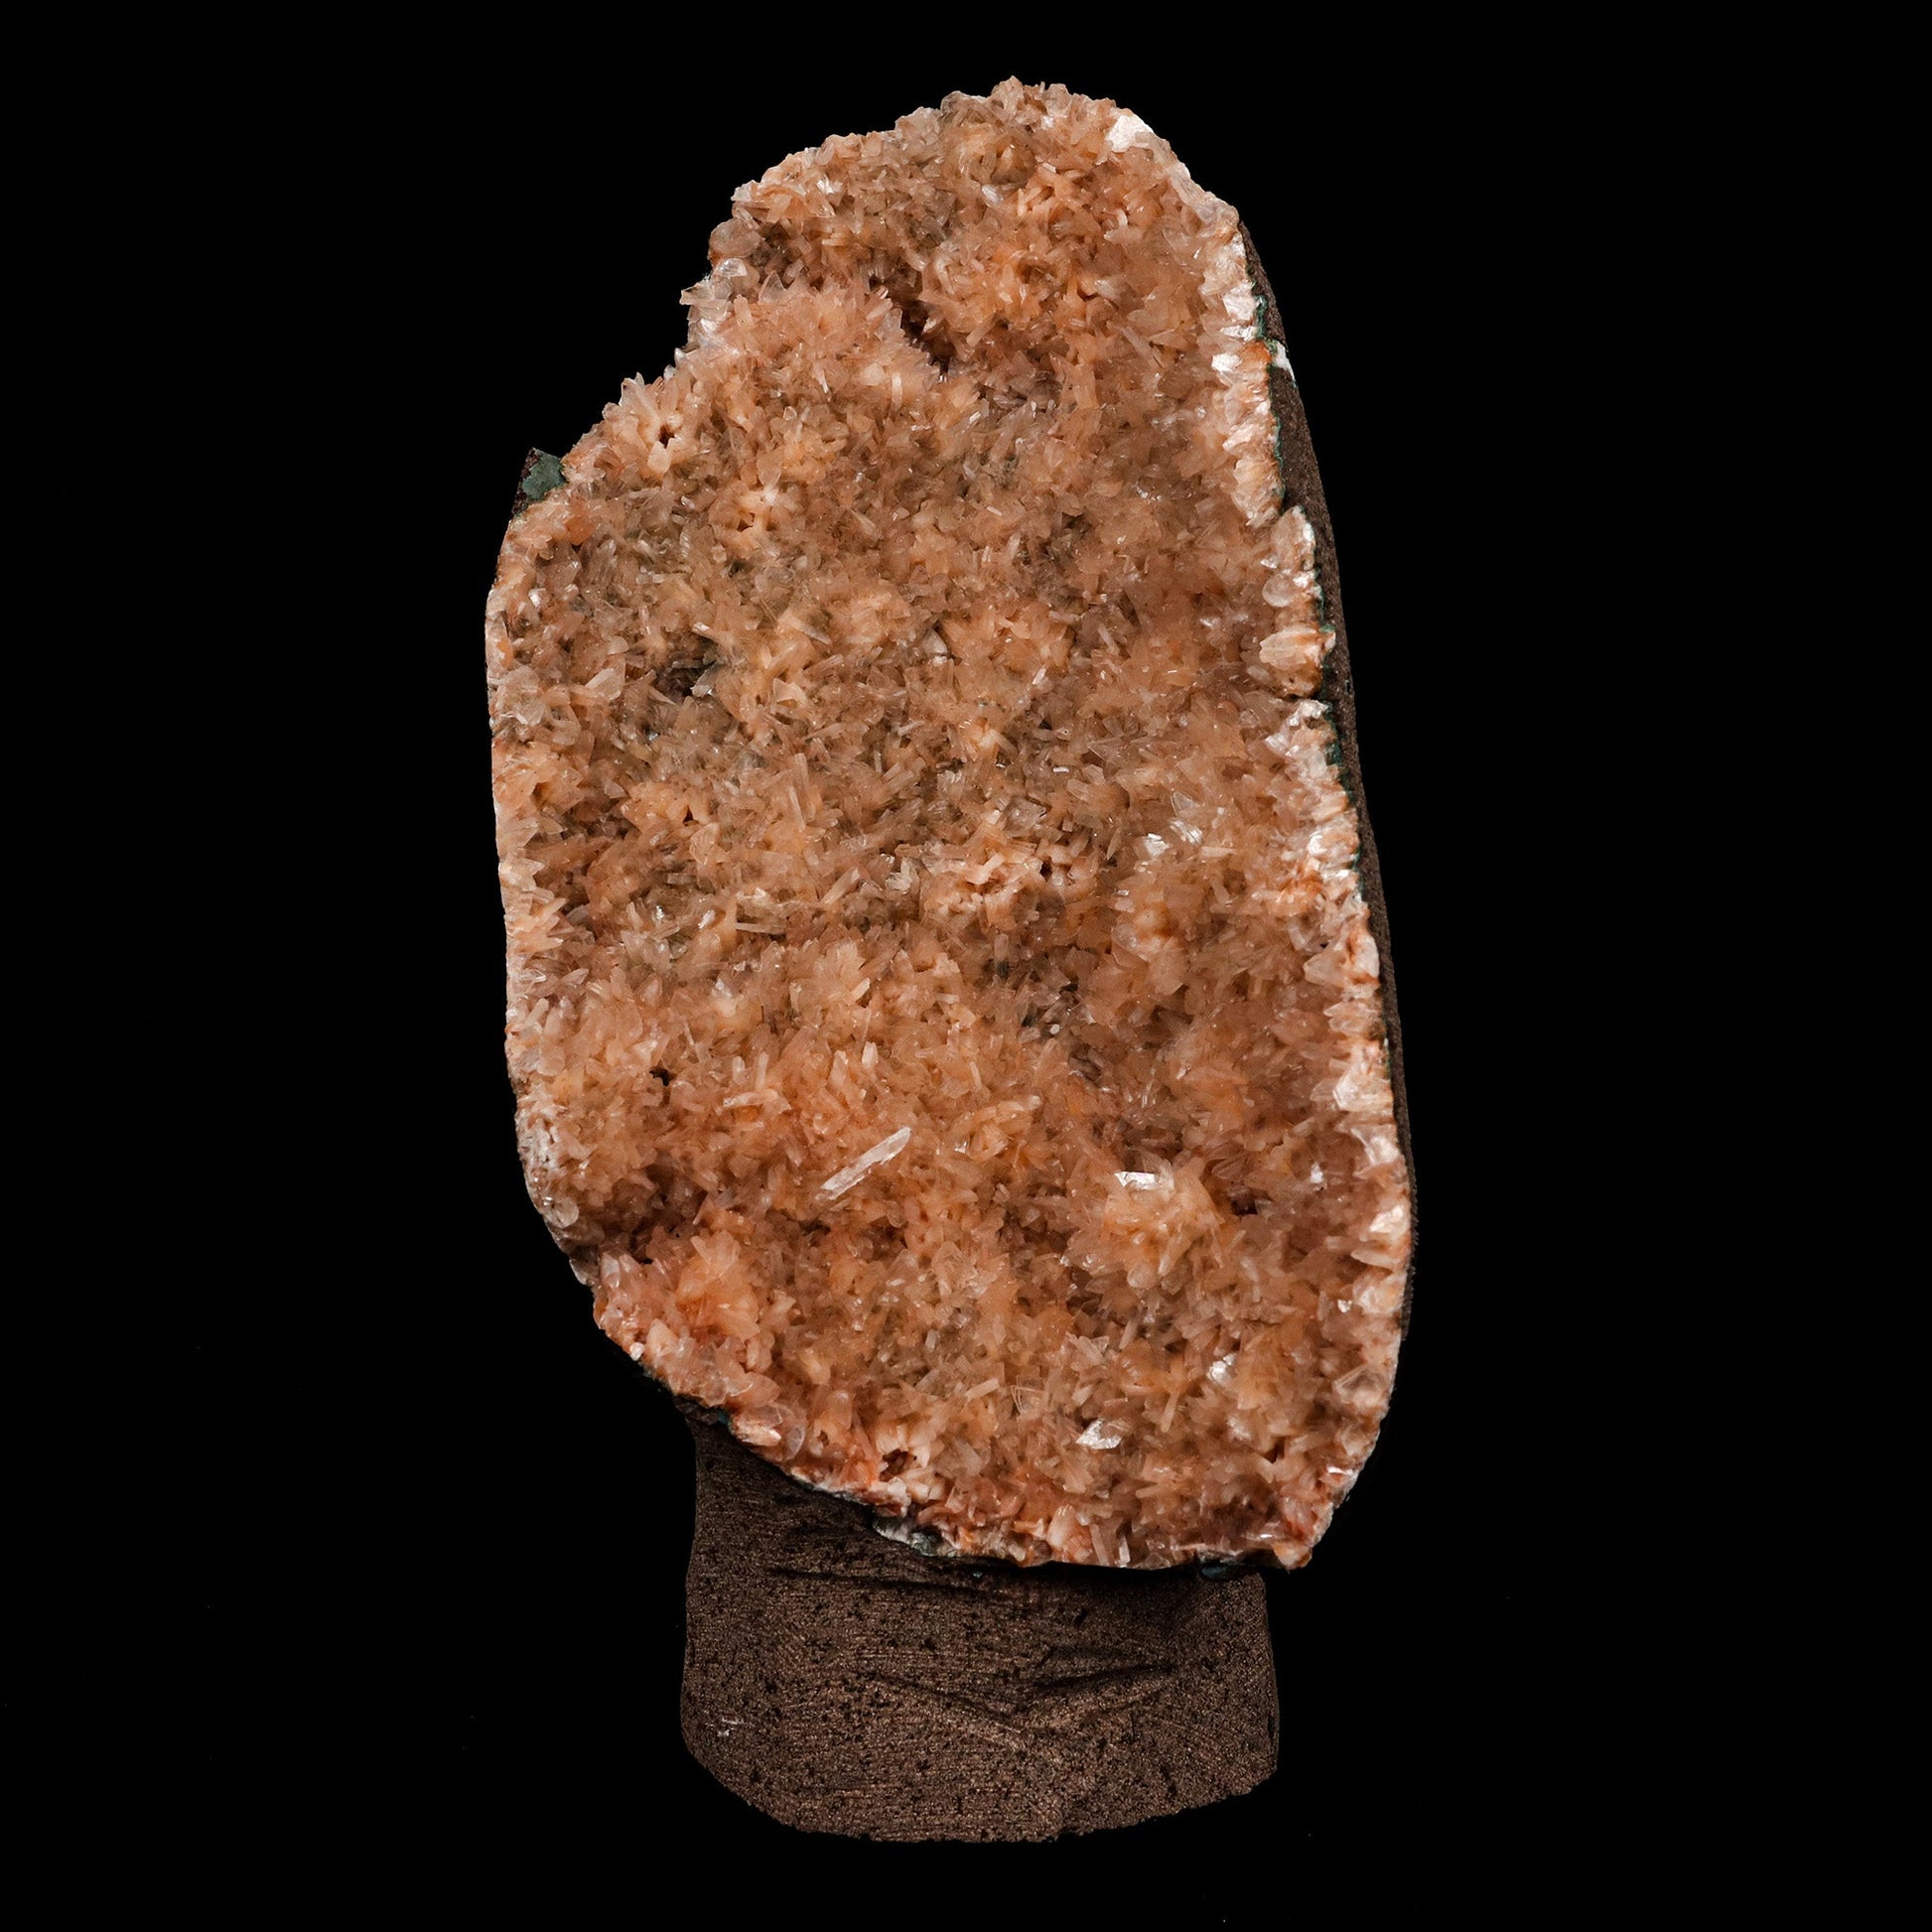 Pink Heulandite Crystals Self Standing Geode Natural Mineral Specimen …  https://www.superbminerals.us/products/pink-heulandite-crystals-self-standing-geode-natural-mineral-specimen-b-5241  Features: Beautiful piece highlighting a geode with beige, brilliant Heulandite crystals - this piece is very distinctive. Amazing tone, shine and differentiation - this piece is in excellent condition. Primary Mineral(s): Heulandite Secondary Mineral(s): N/AMatrix: N/A 6 Inch x 3 InchWeight : 568 GmsLocality: Aurangab